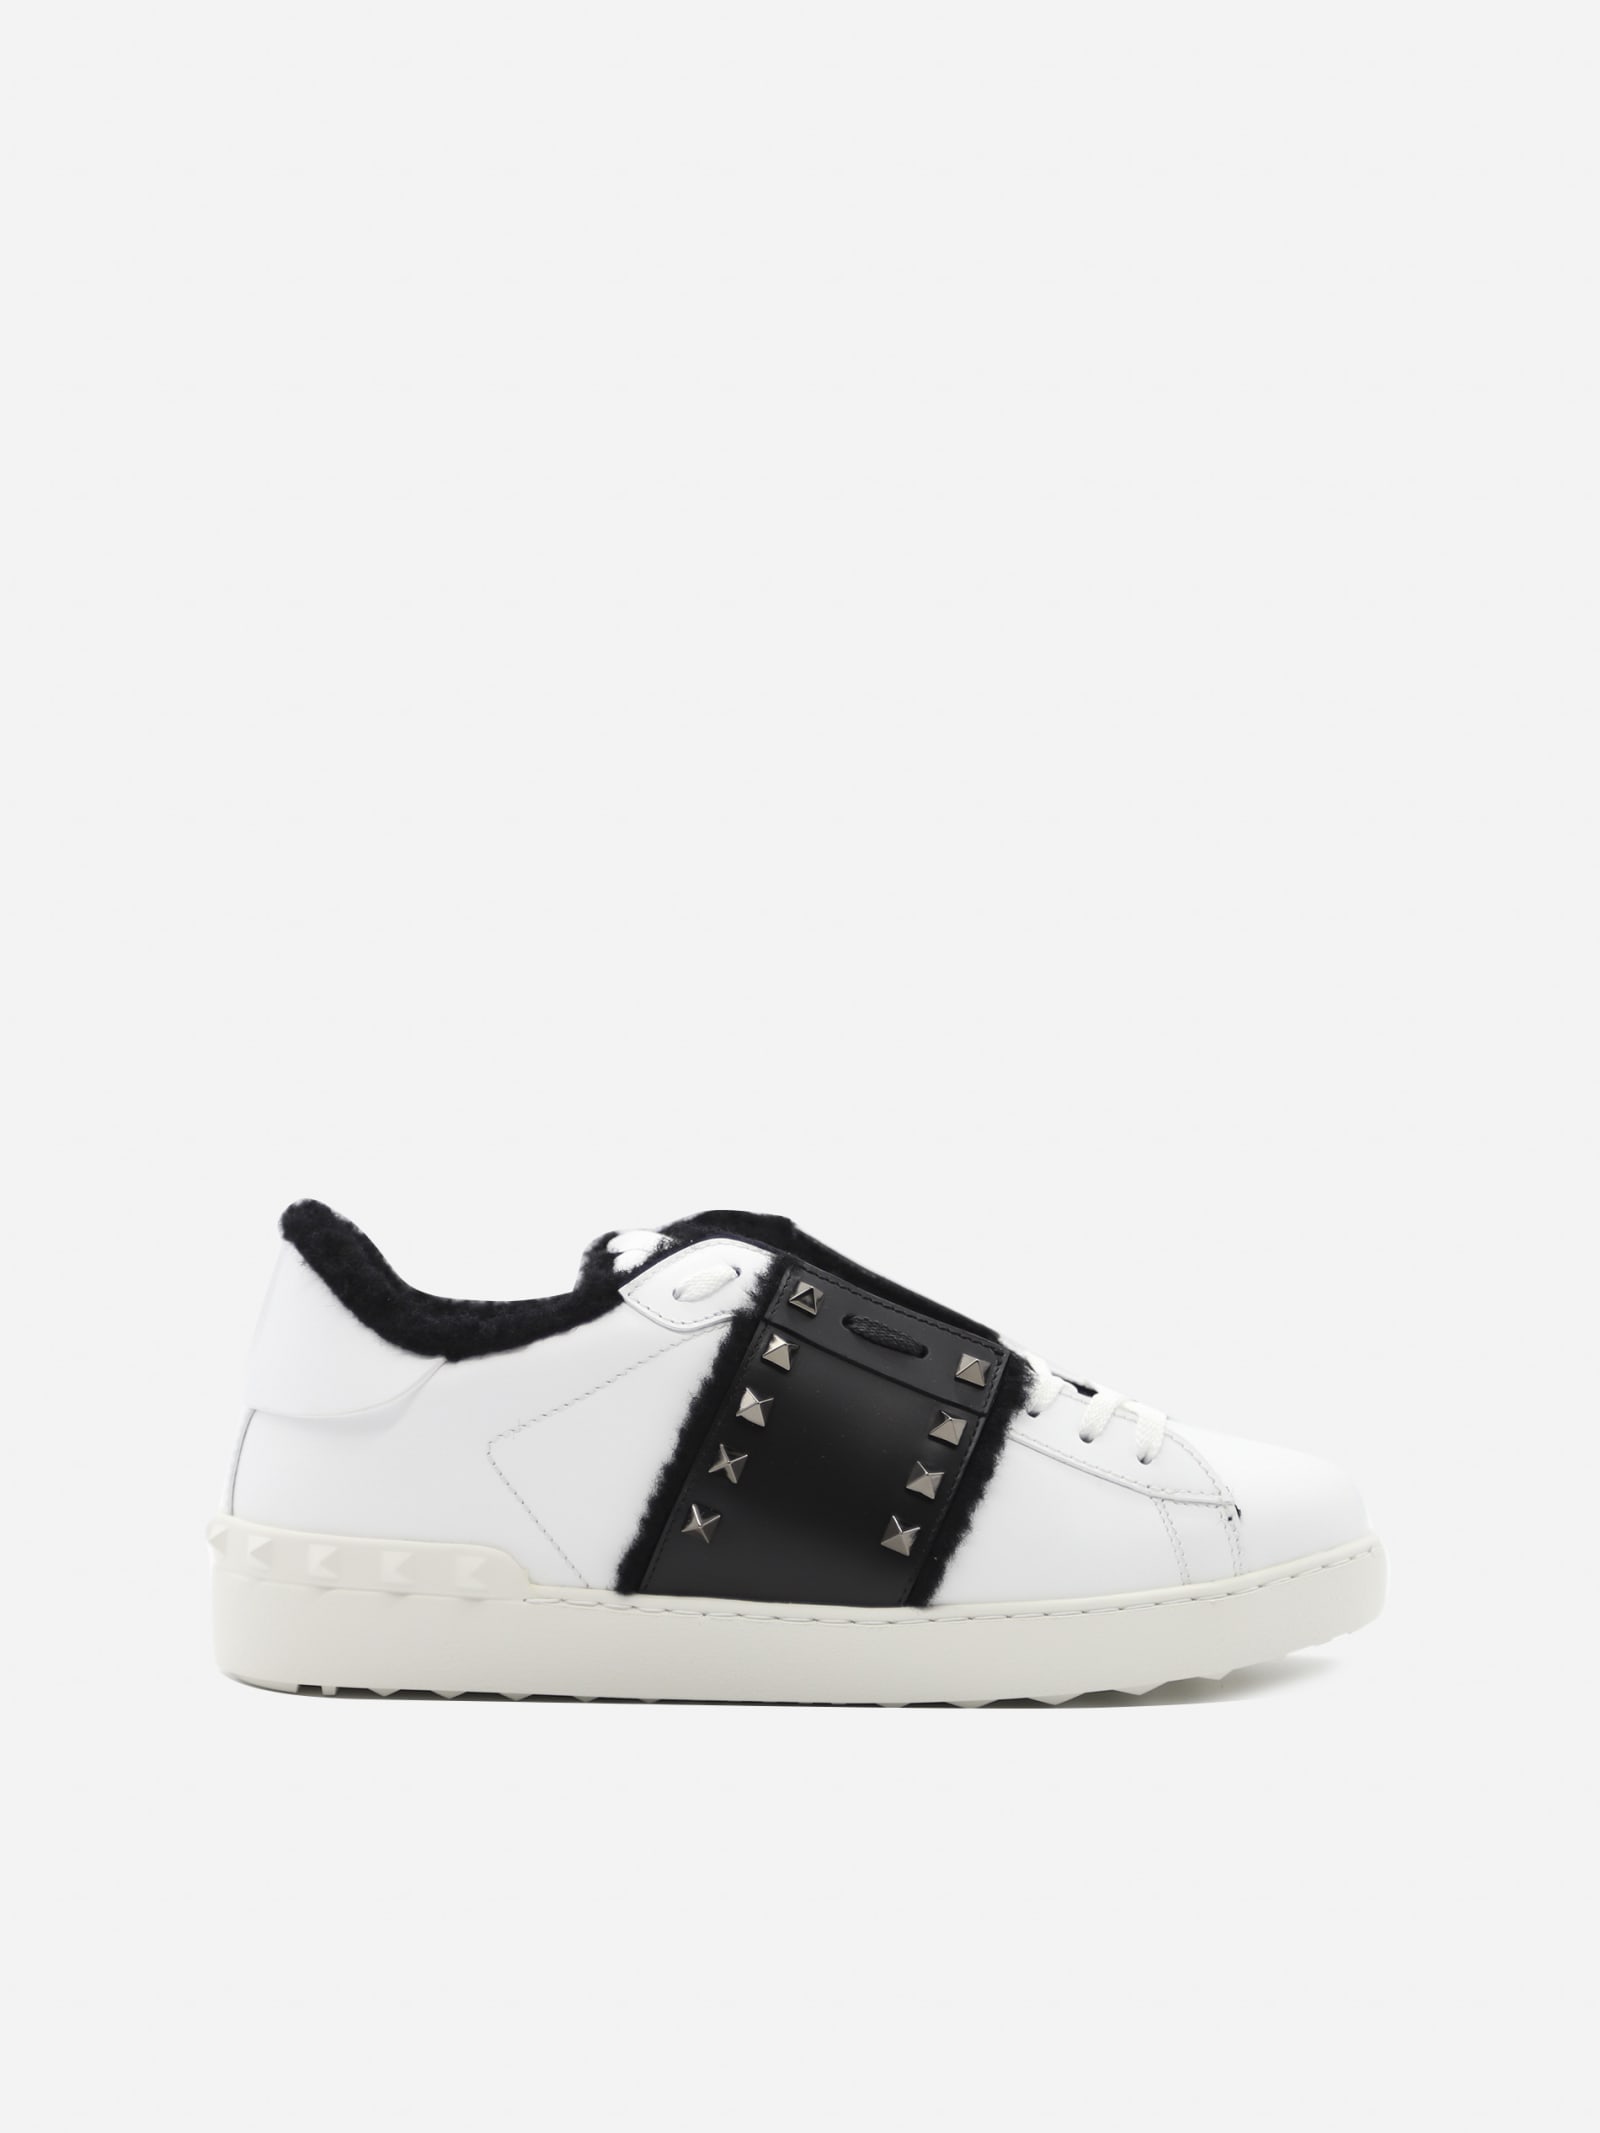 Valentino Garavani Rockstud Untitled Sneakers In Leather With Contrasting Inserts